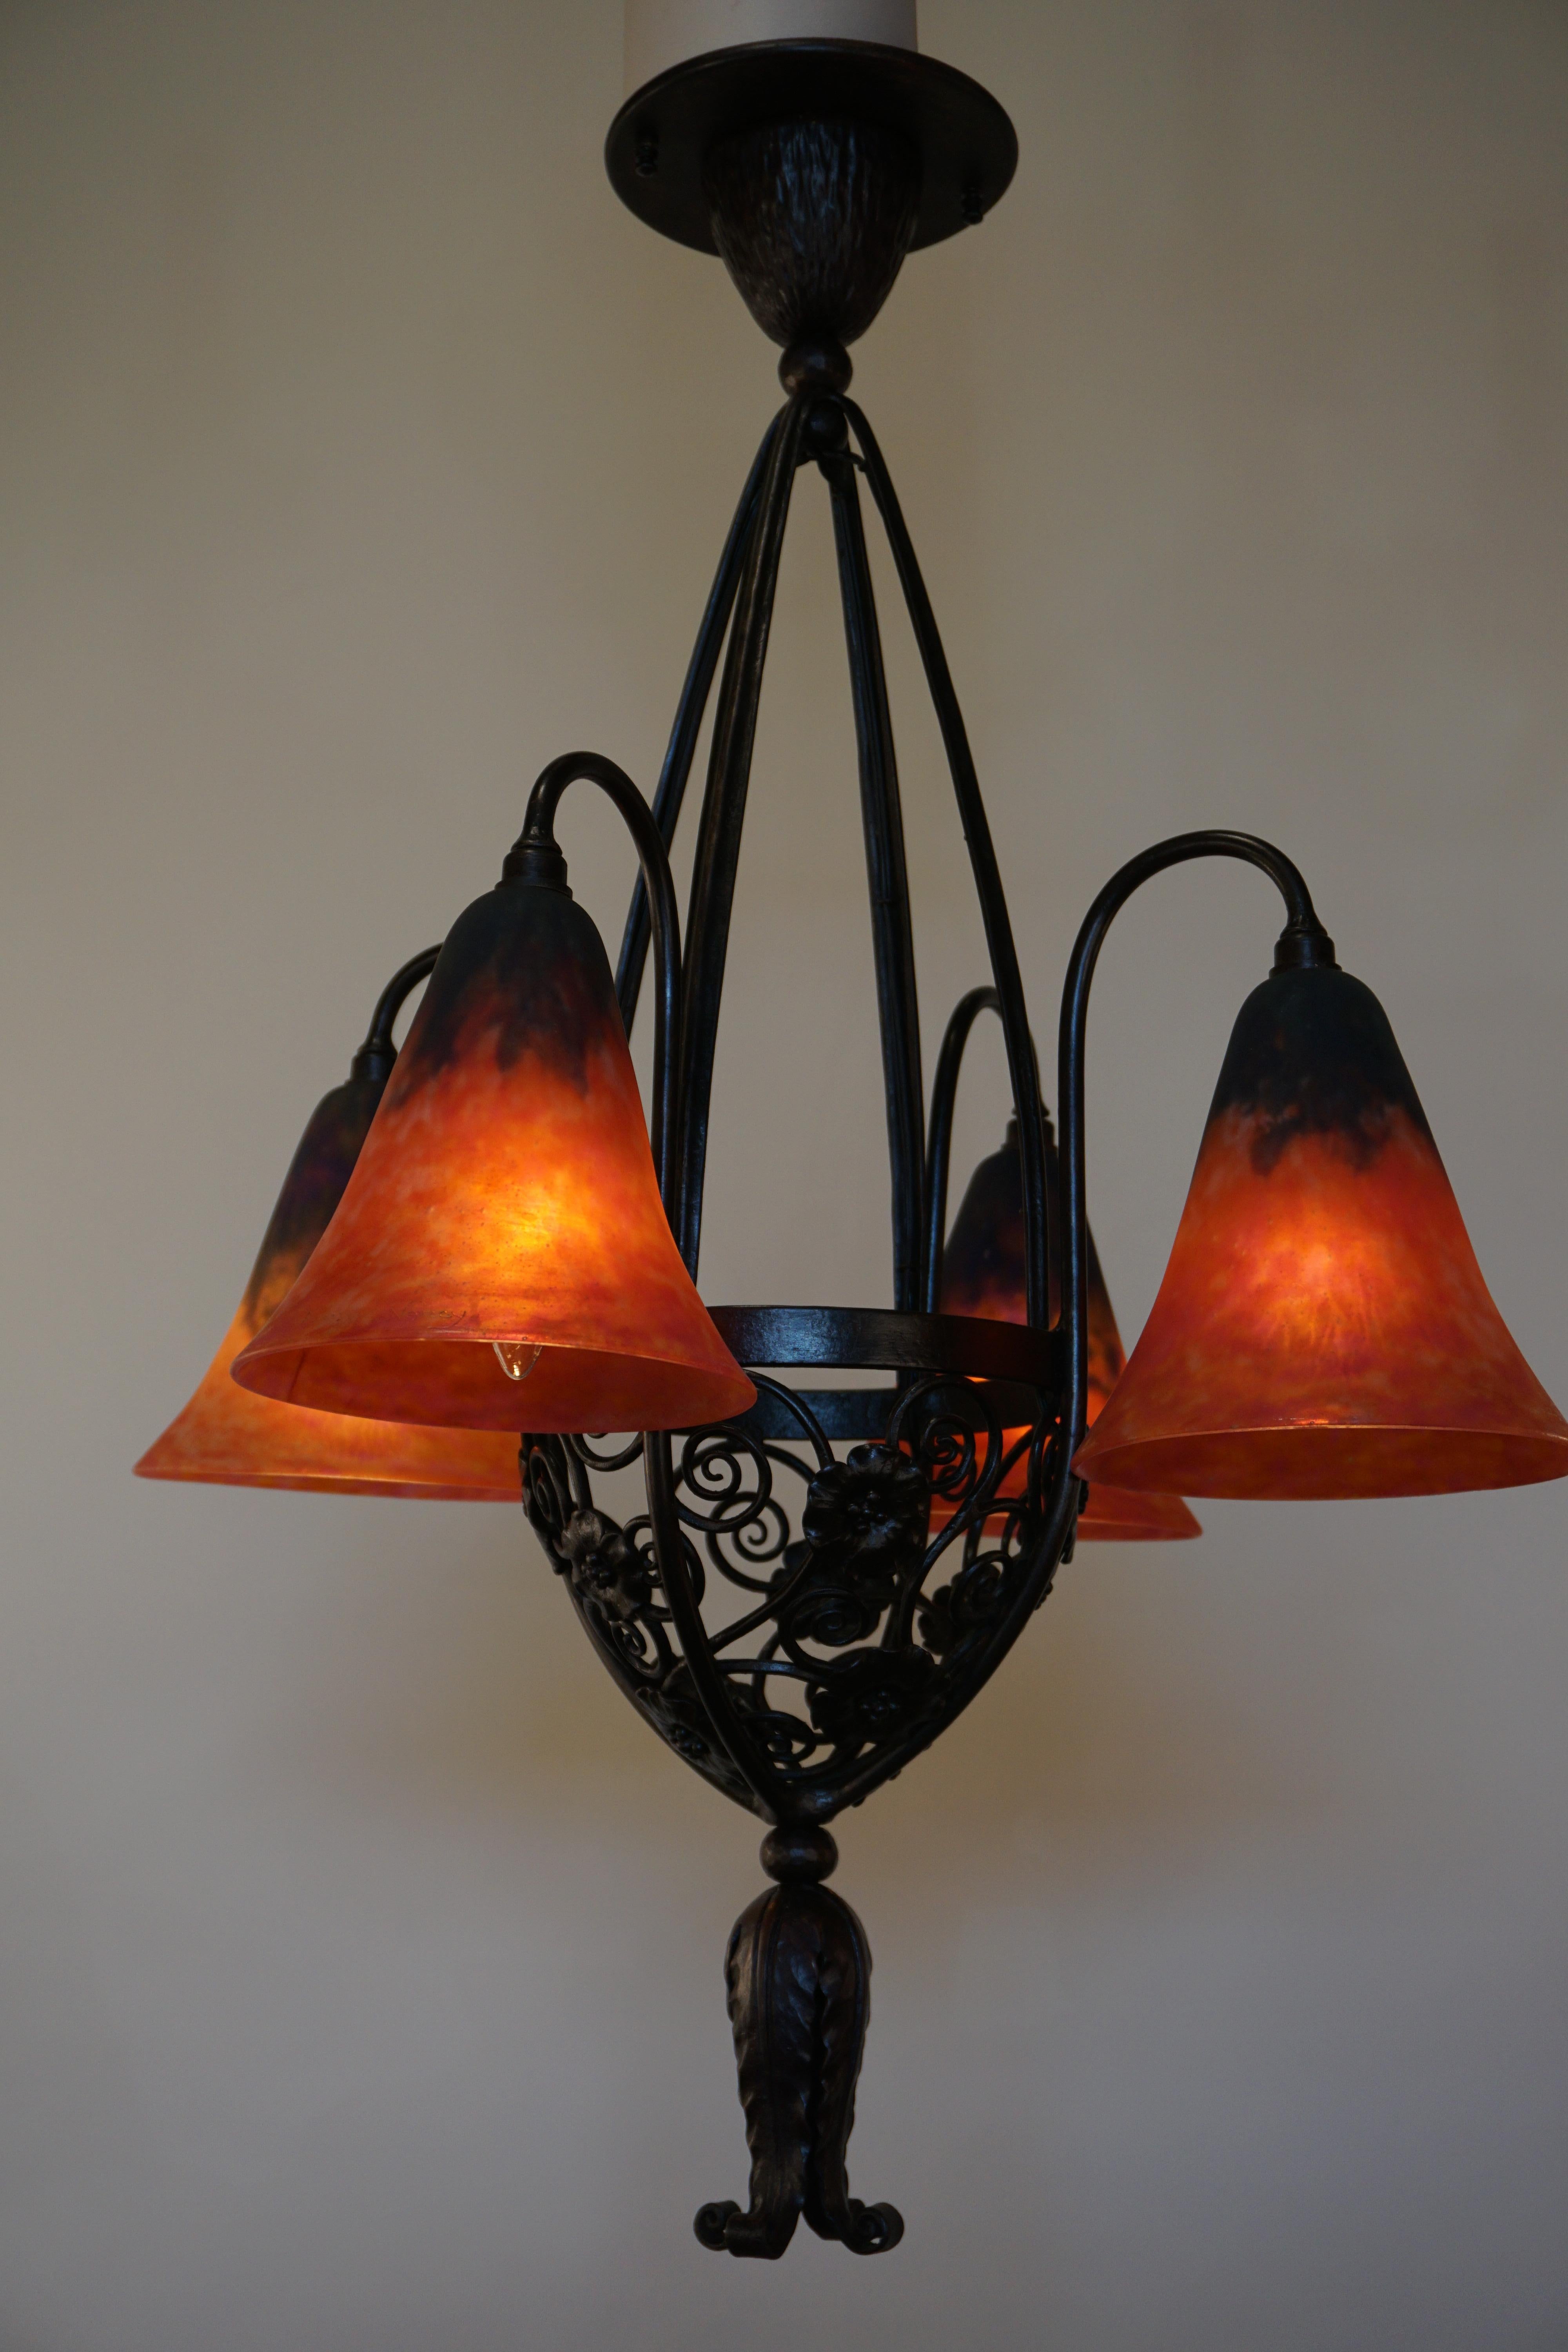 French 1920s wrought iron chandelier by Edger Brandt, handblown glass shades by Daum Nancy.